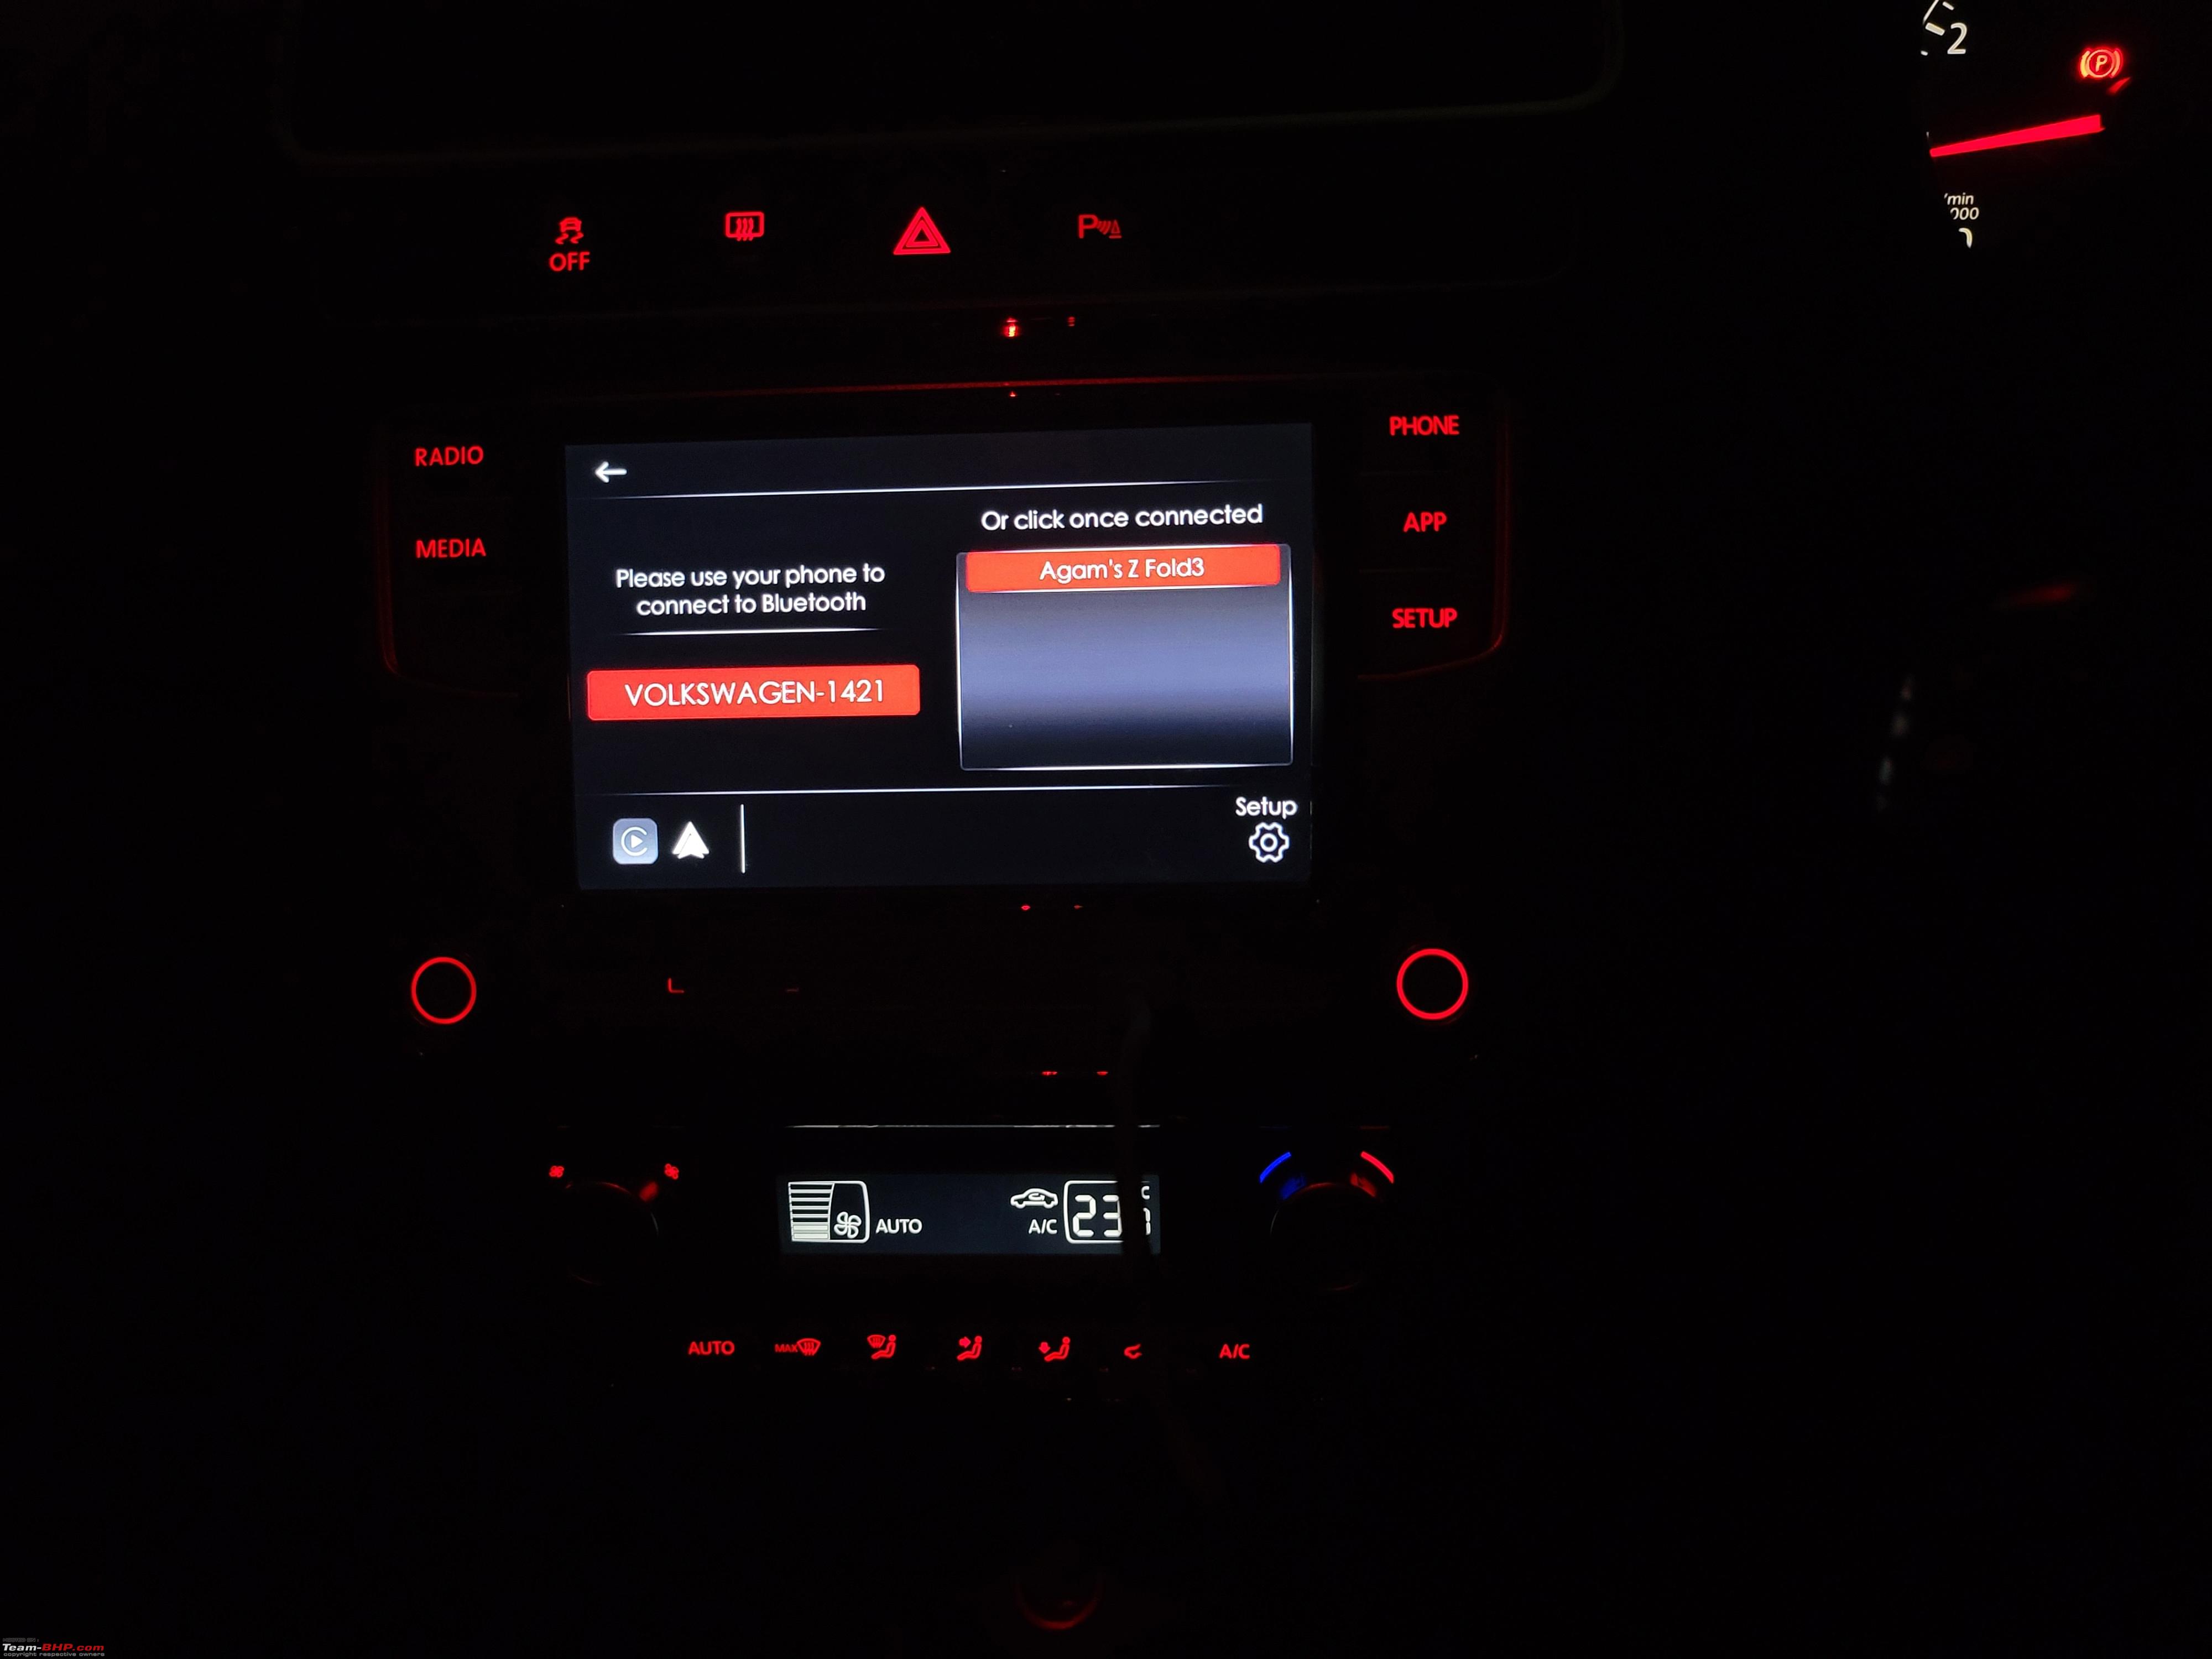 Carlinkit 4.0  Wireless Carplay & Android Auto from the same adapter - Team -BHP